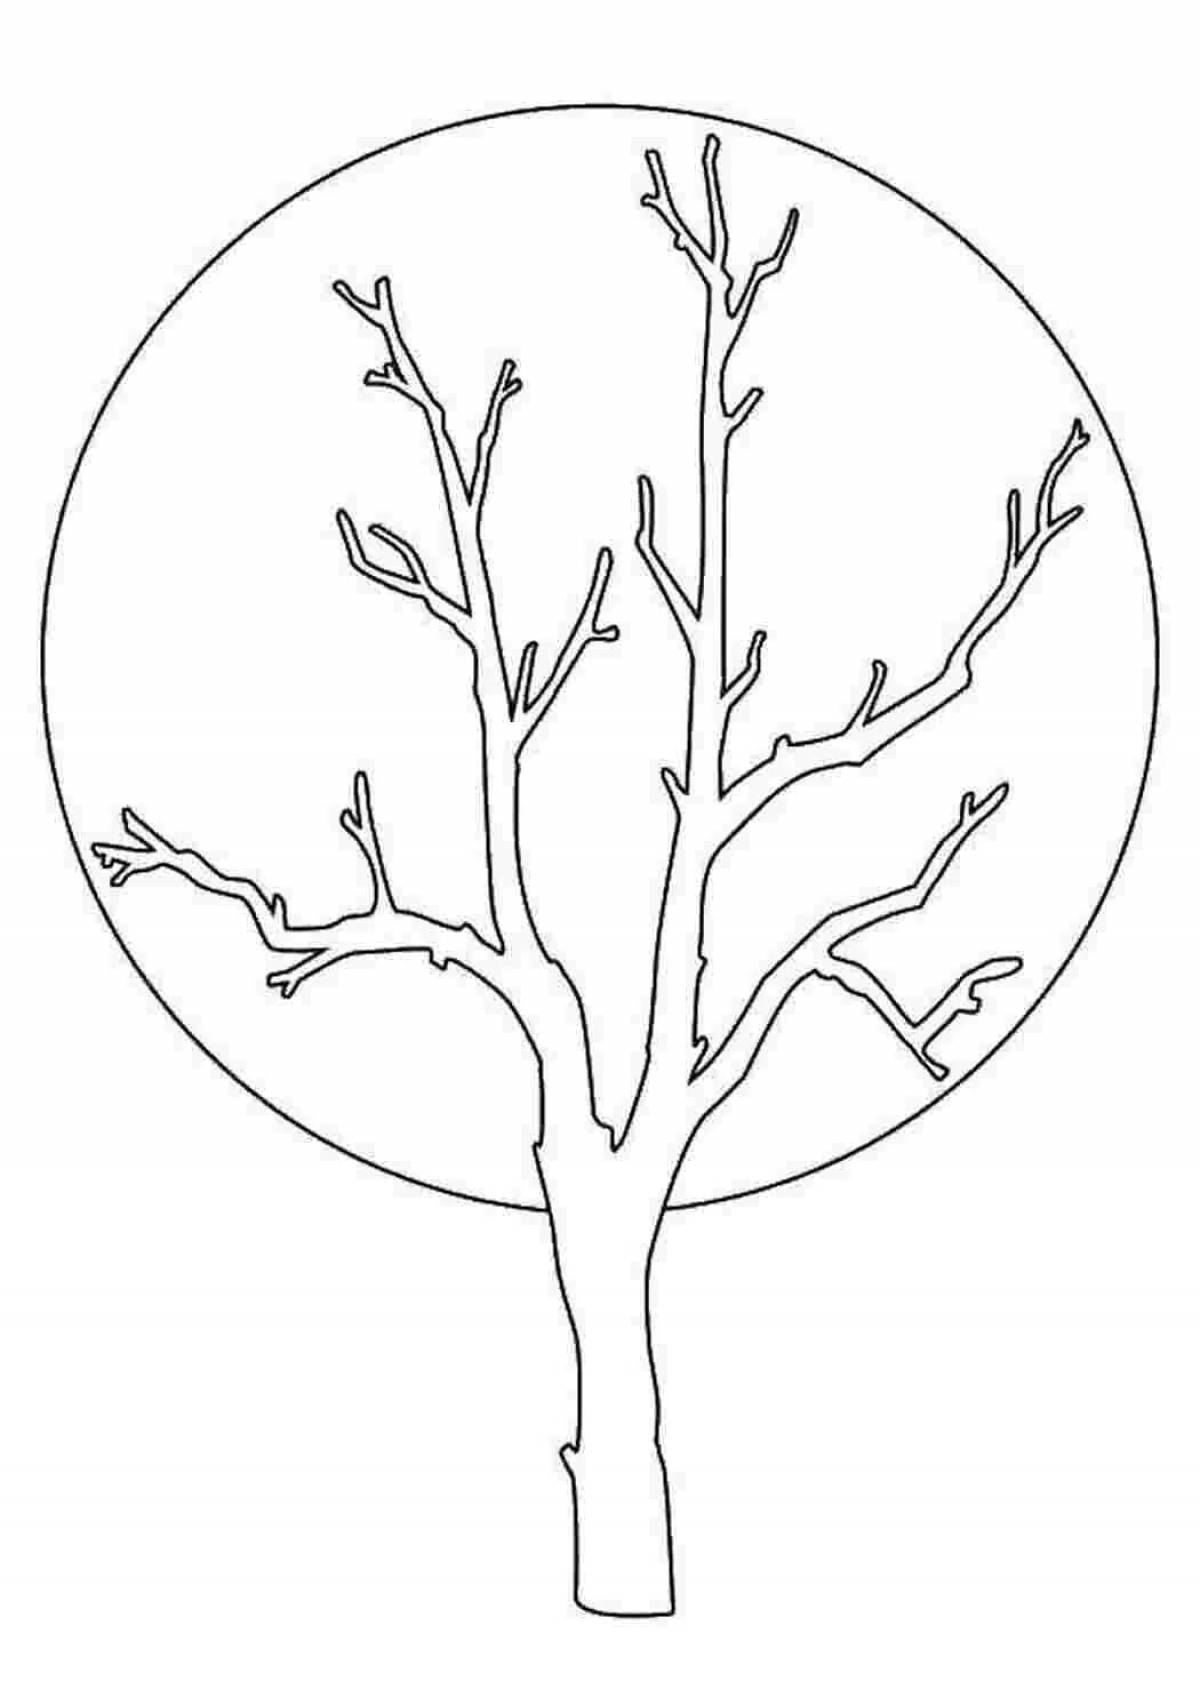 Tree without leaves outline #14